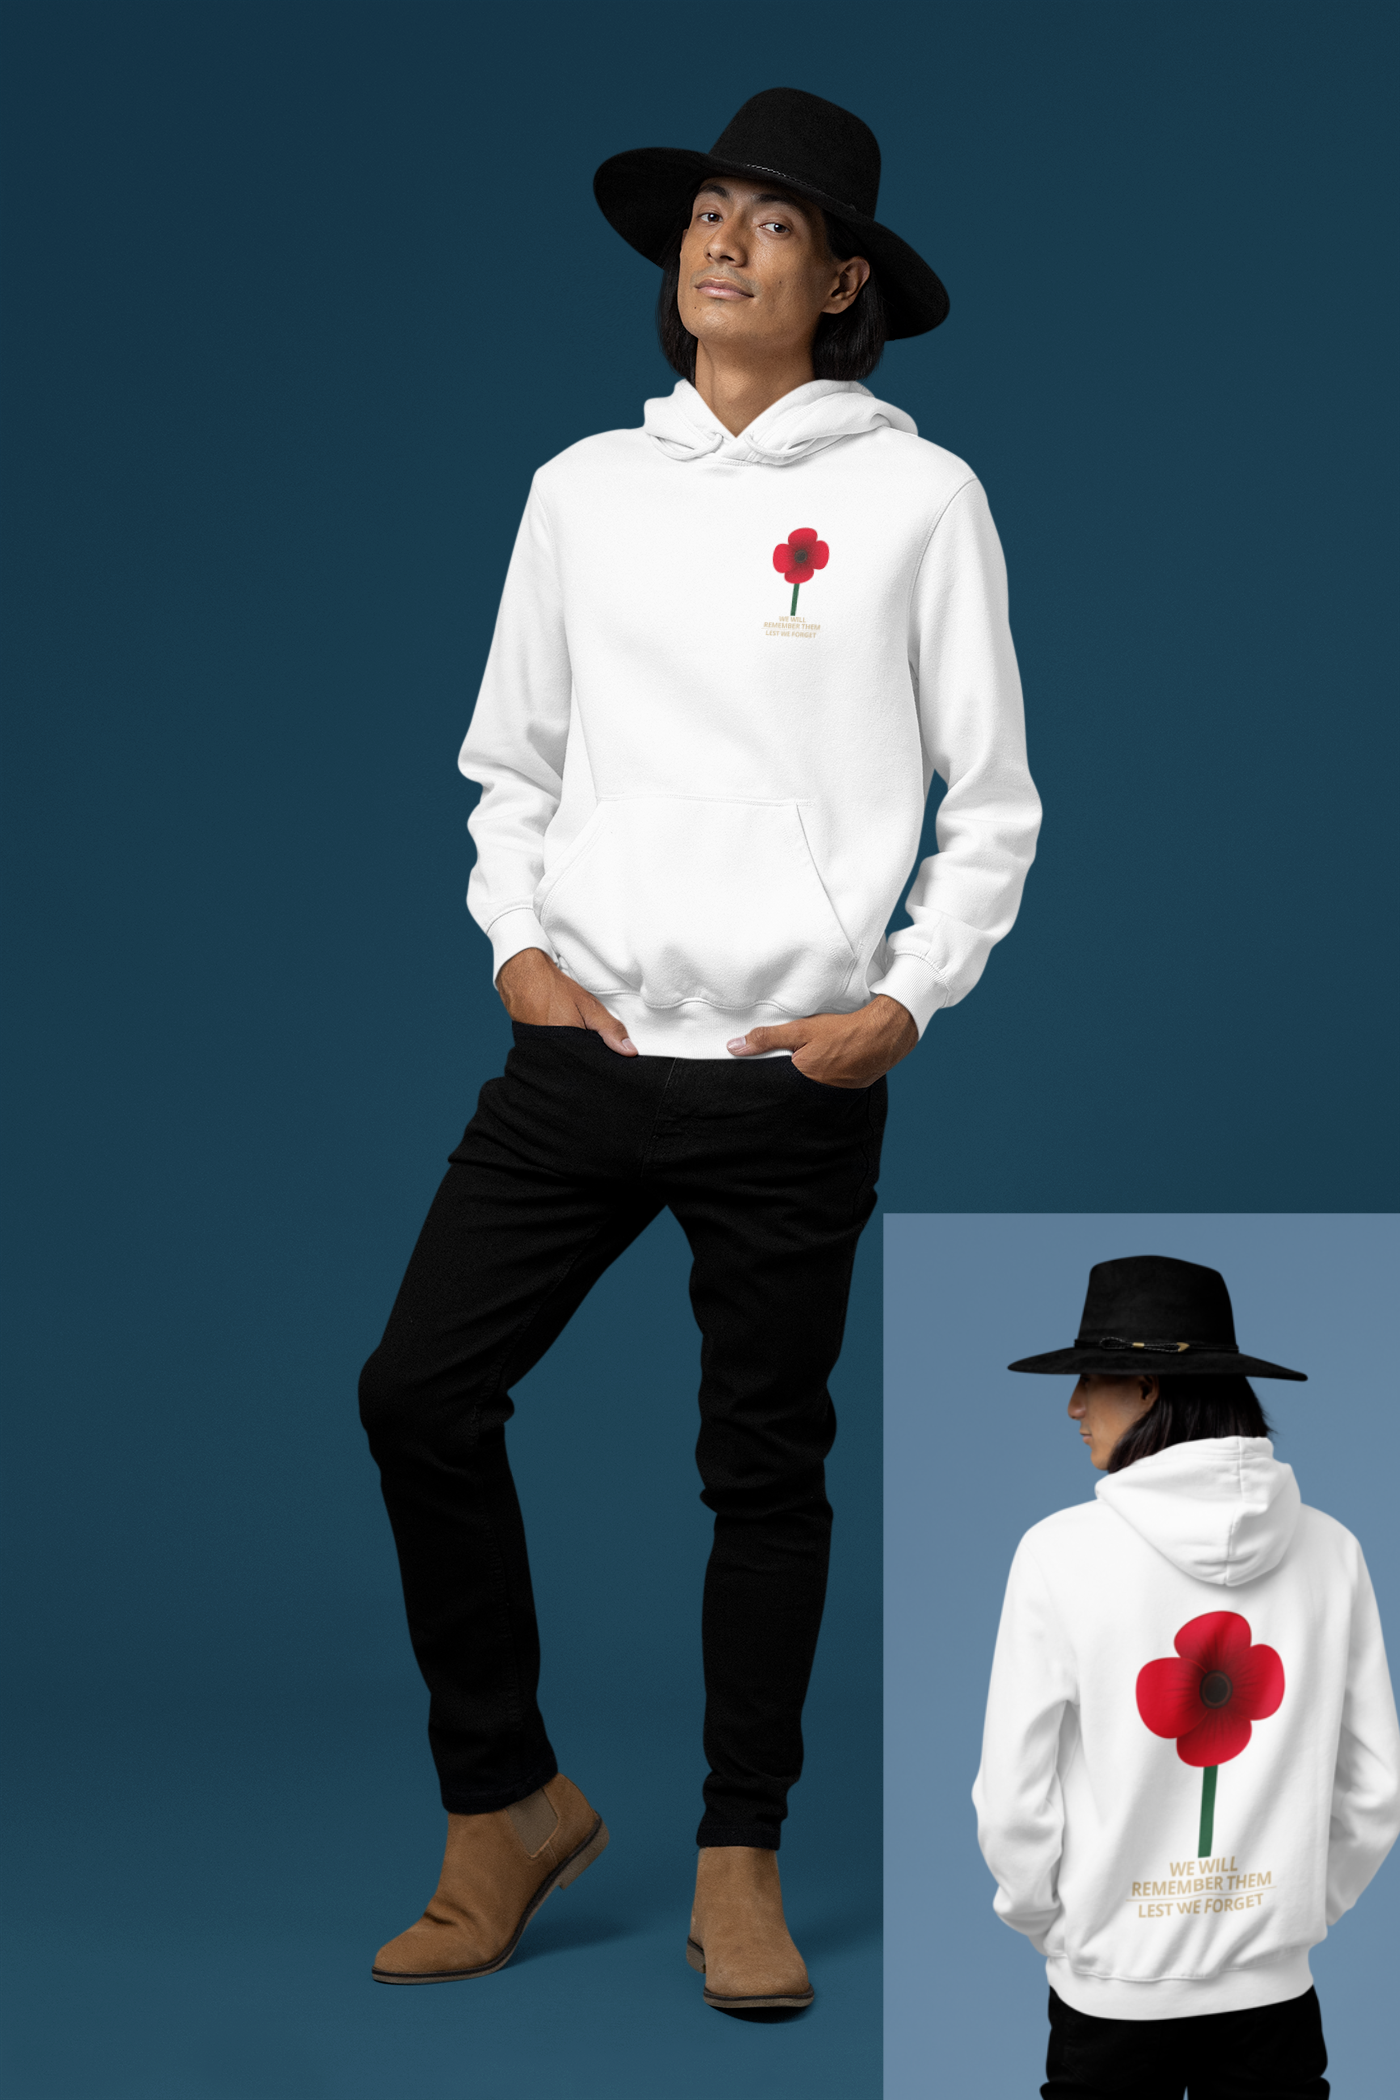 Anzac - We Will Remember Them, Lest We Forget - Adult Hoodie